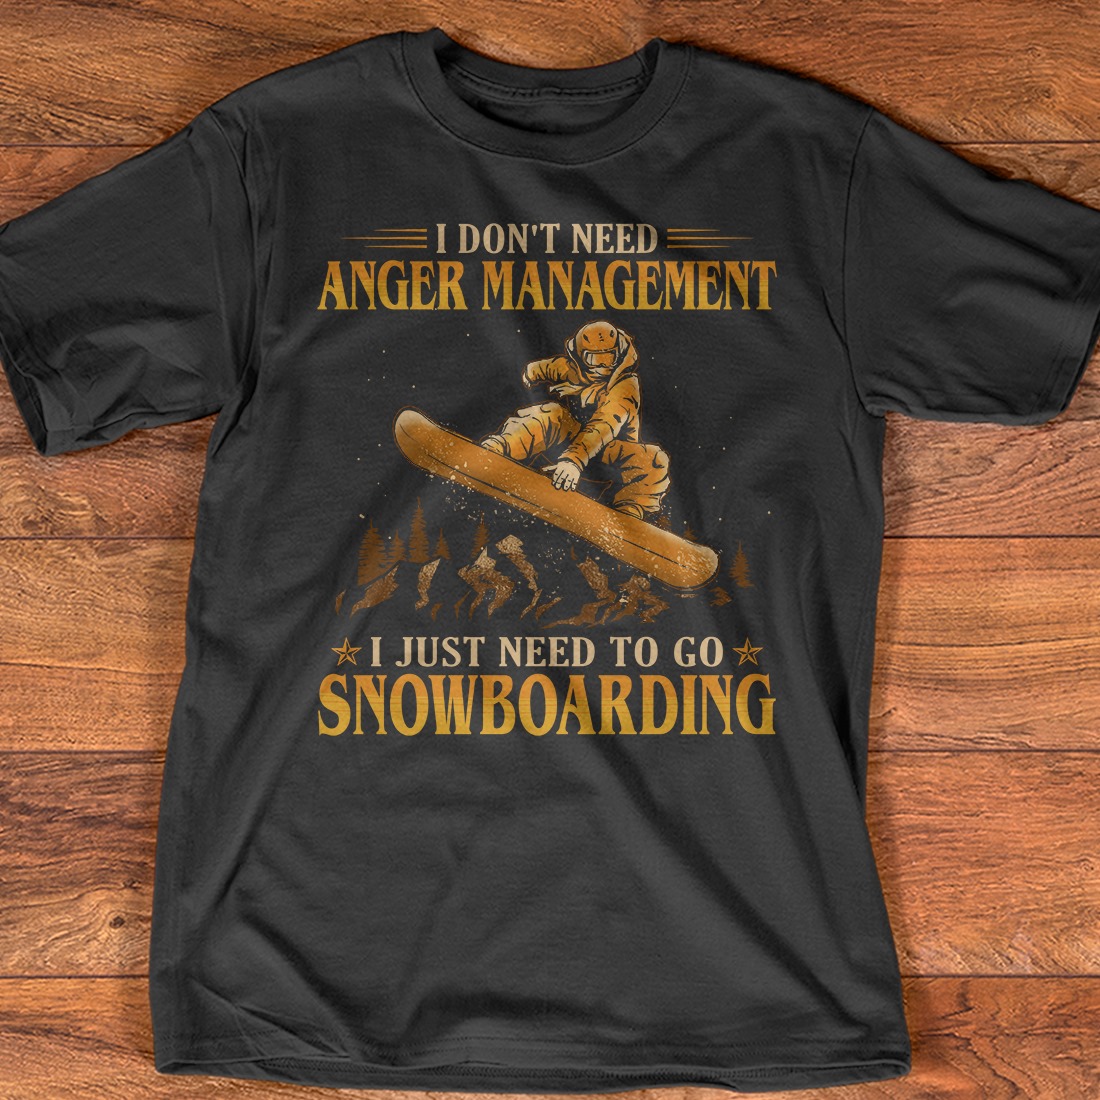 I don't need anger management I just need to go snowboarding - Love going snowboarding